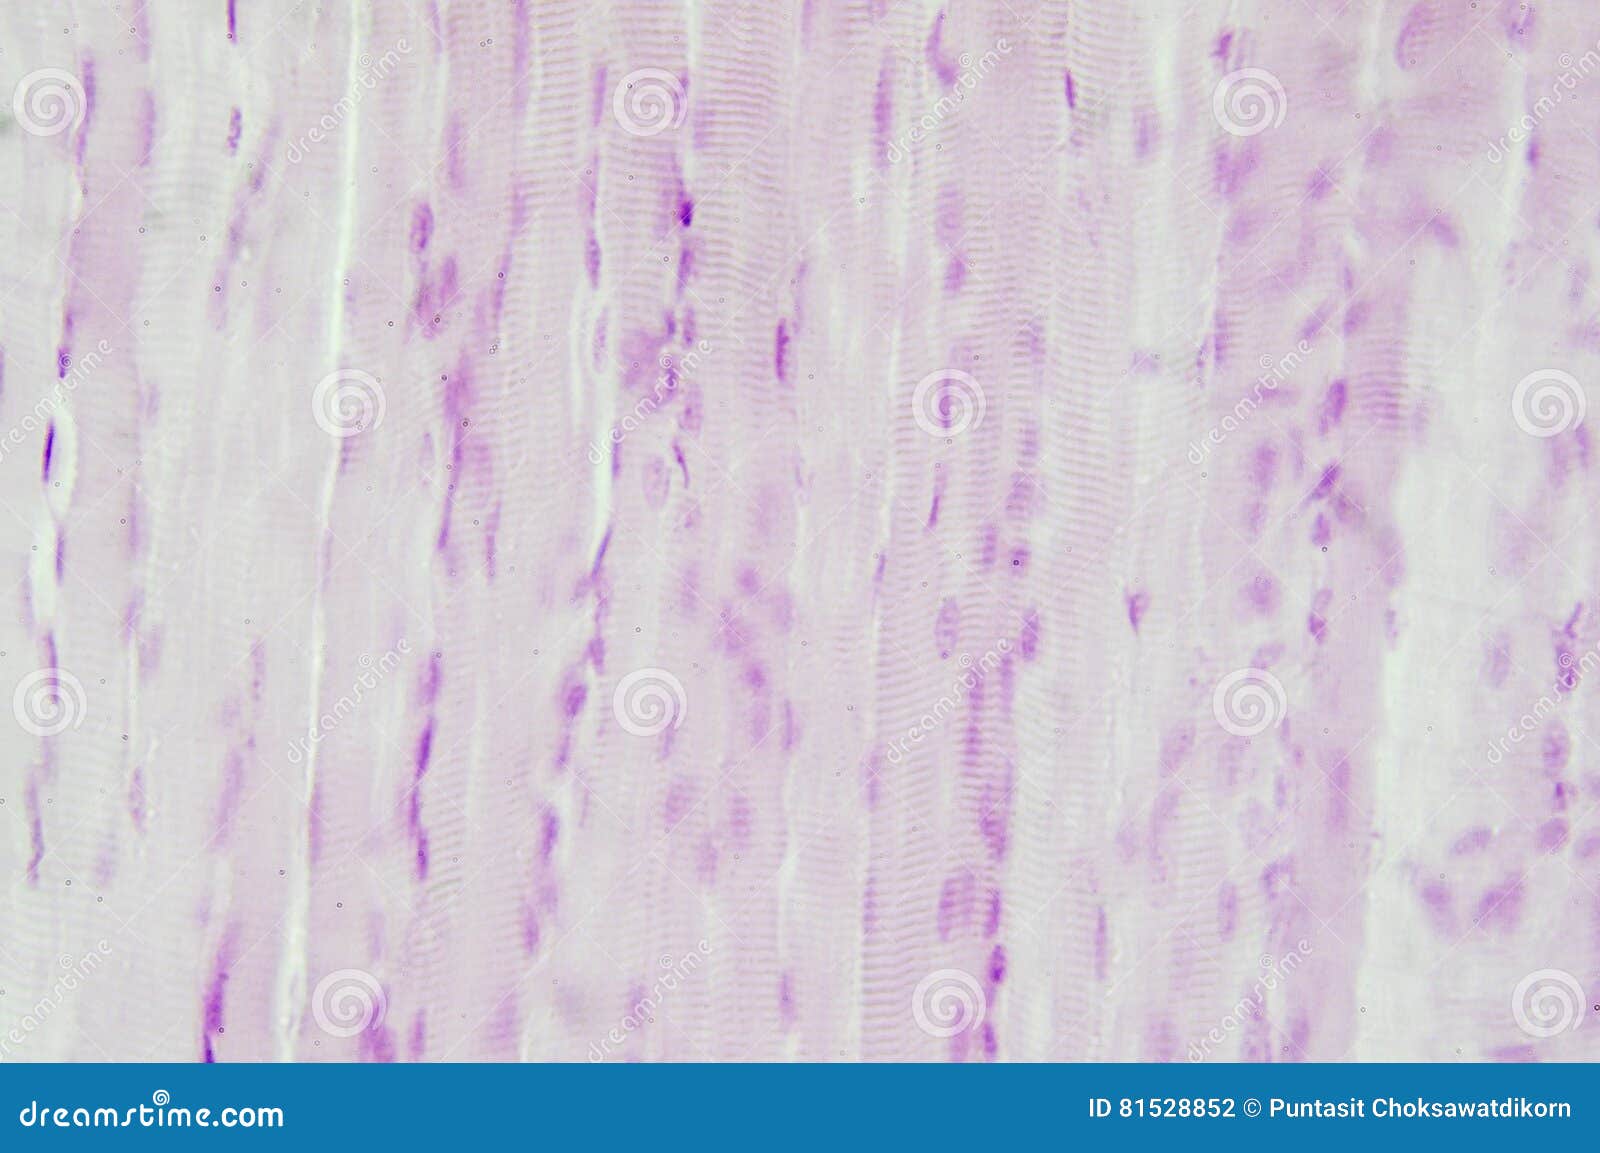 histology of skeletal muscle